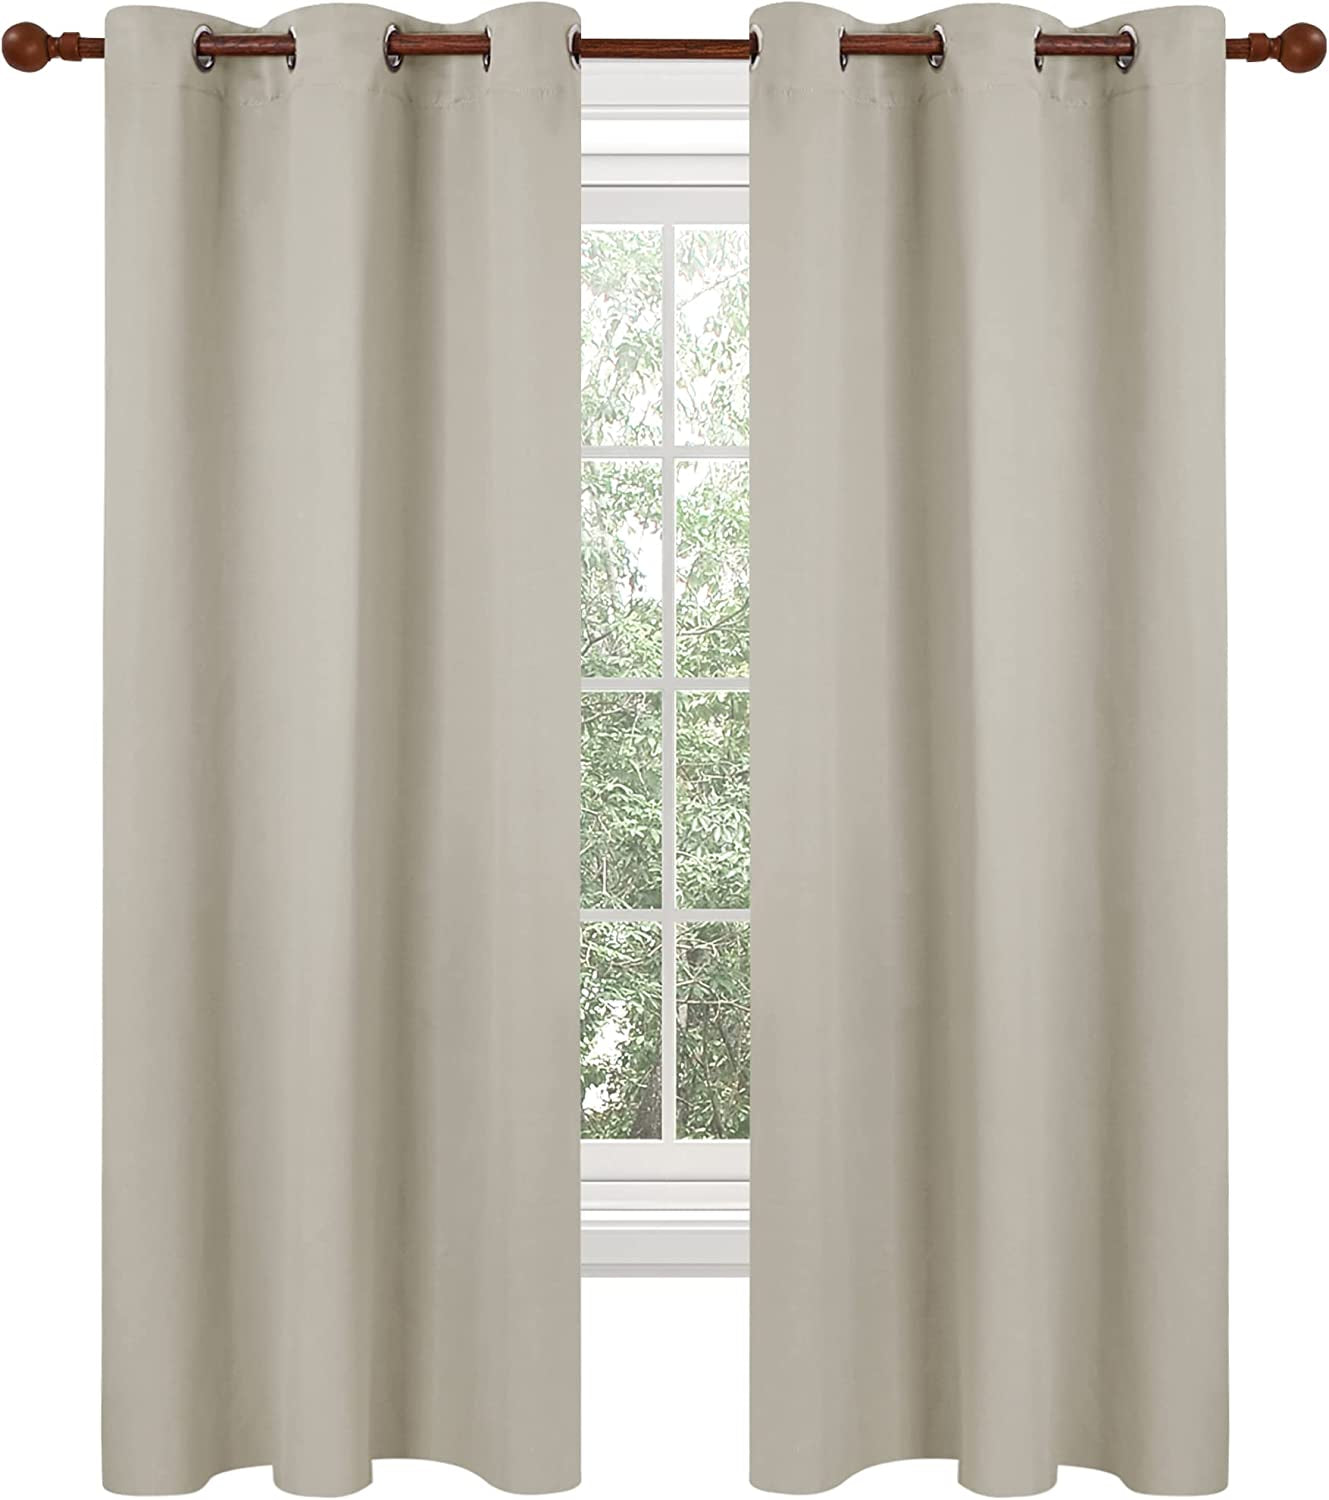 Deconovo 100% Blackout Curtains Room Darkening Thermal Insulated Blackout Grommet Window Curtain for Living Room,Black,42X120-Inch,1 Panel  Deconovo Light Beige 42X63 Inch 